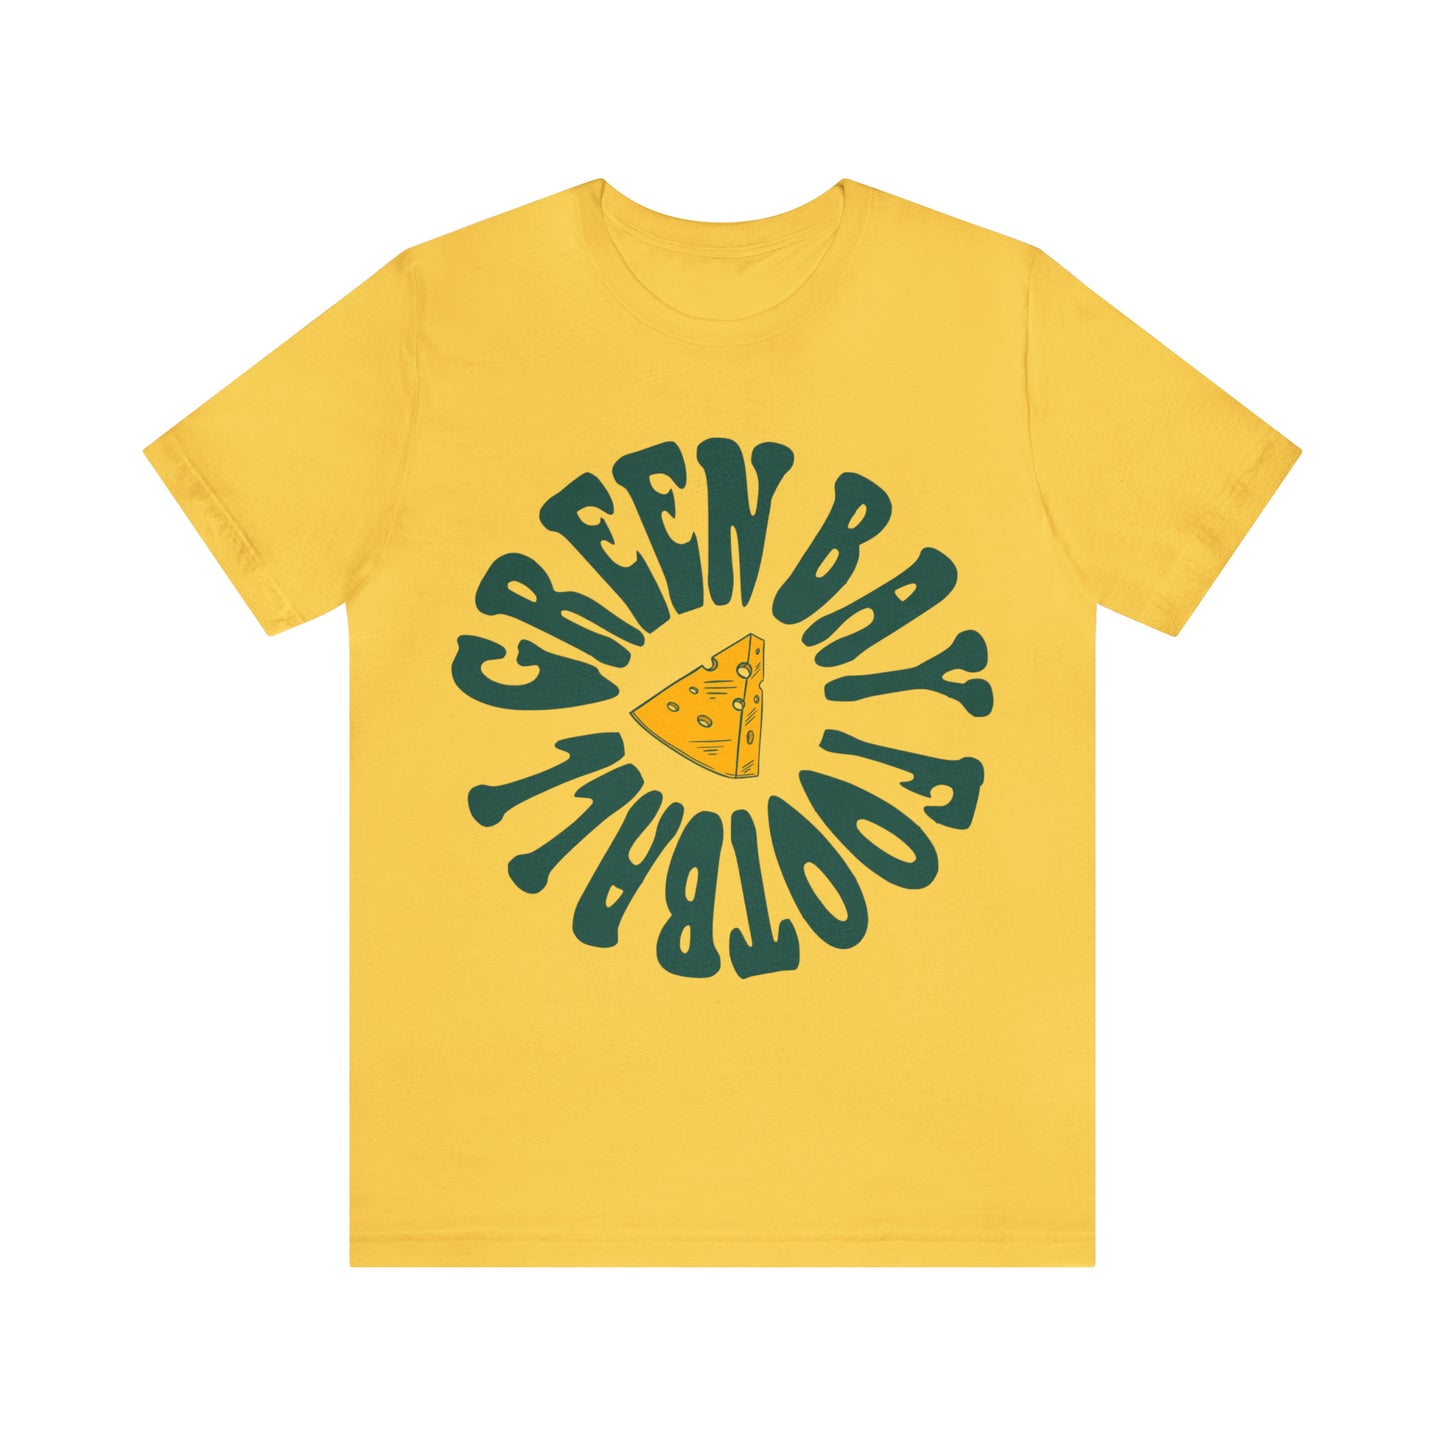 Hippy Green Bay Packers Retro Tee - Vintage Style T-Shirt - Wisconsin Cheese Head - Design 2